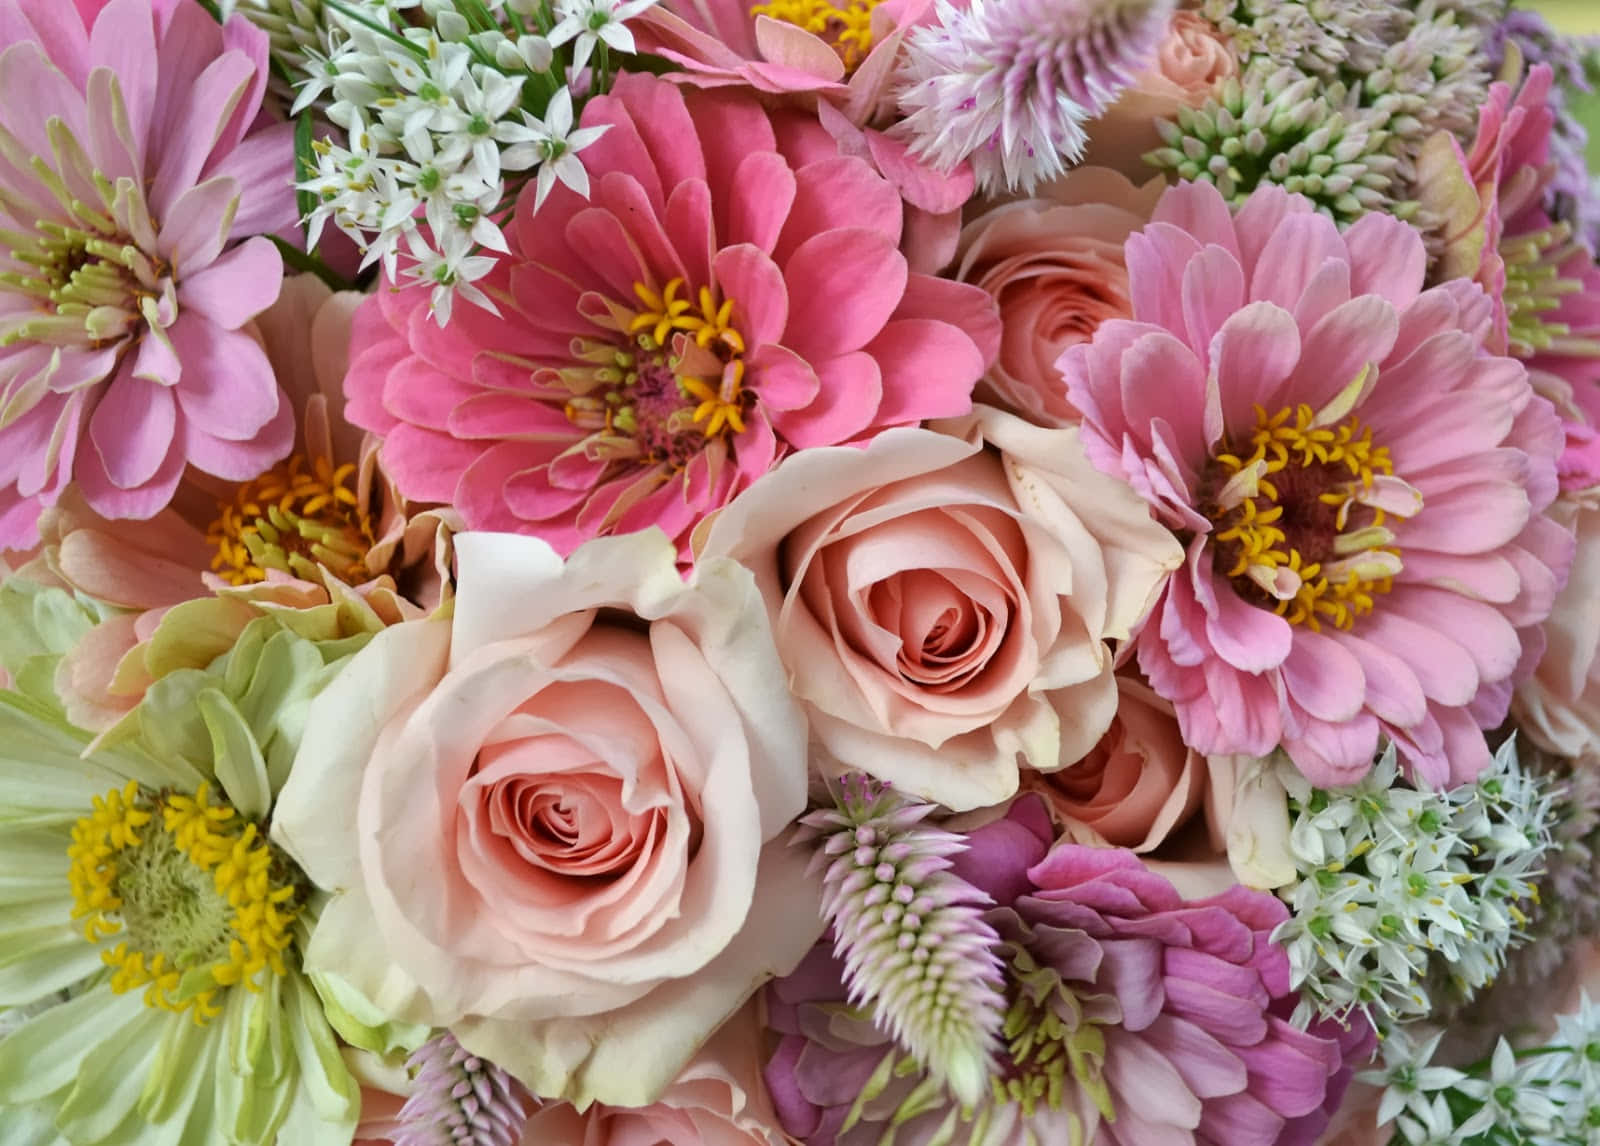 A Bouquet Of Flowers With Pink, Green And White Flowers